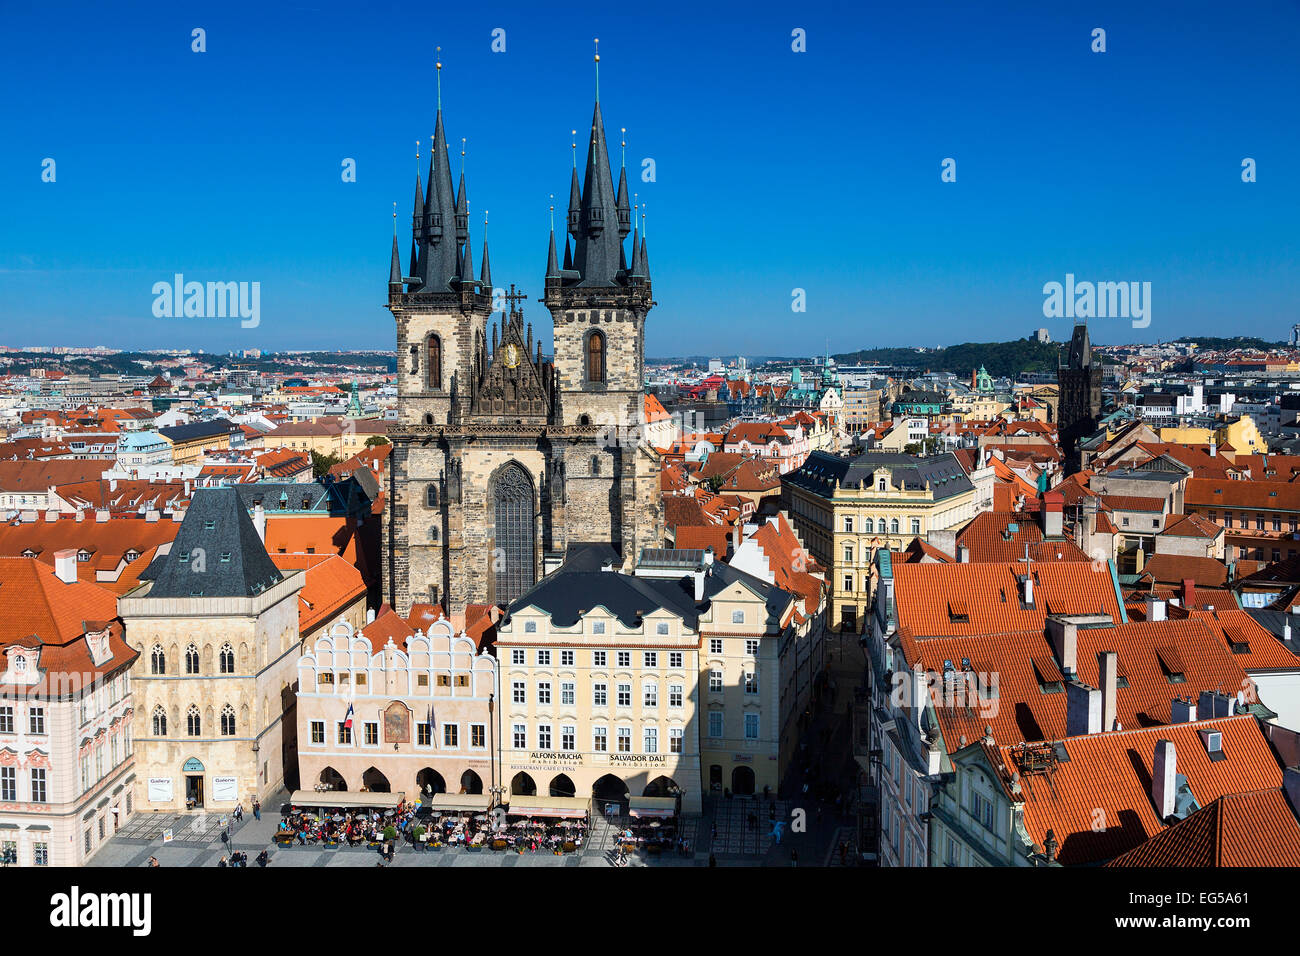 Prague, Old Town Square, Church of Our Lady before tyn Stock Photo